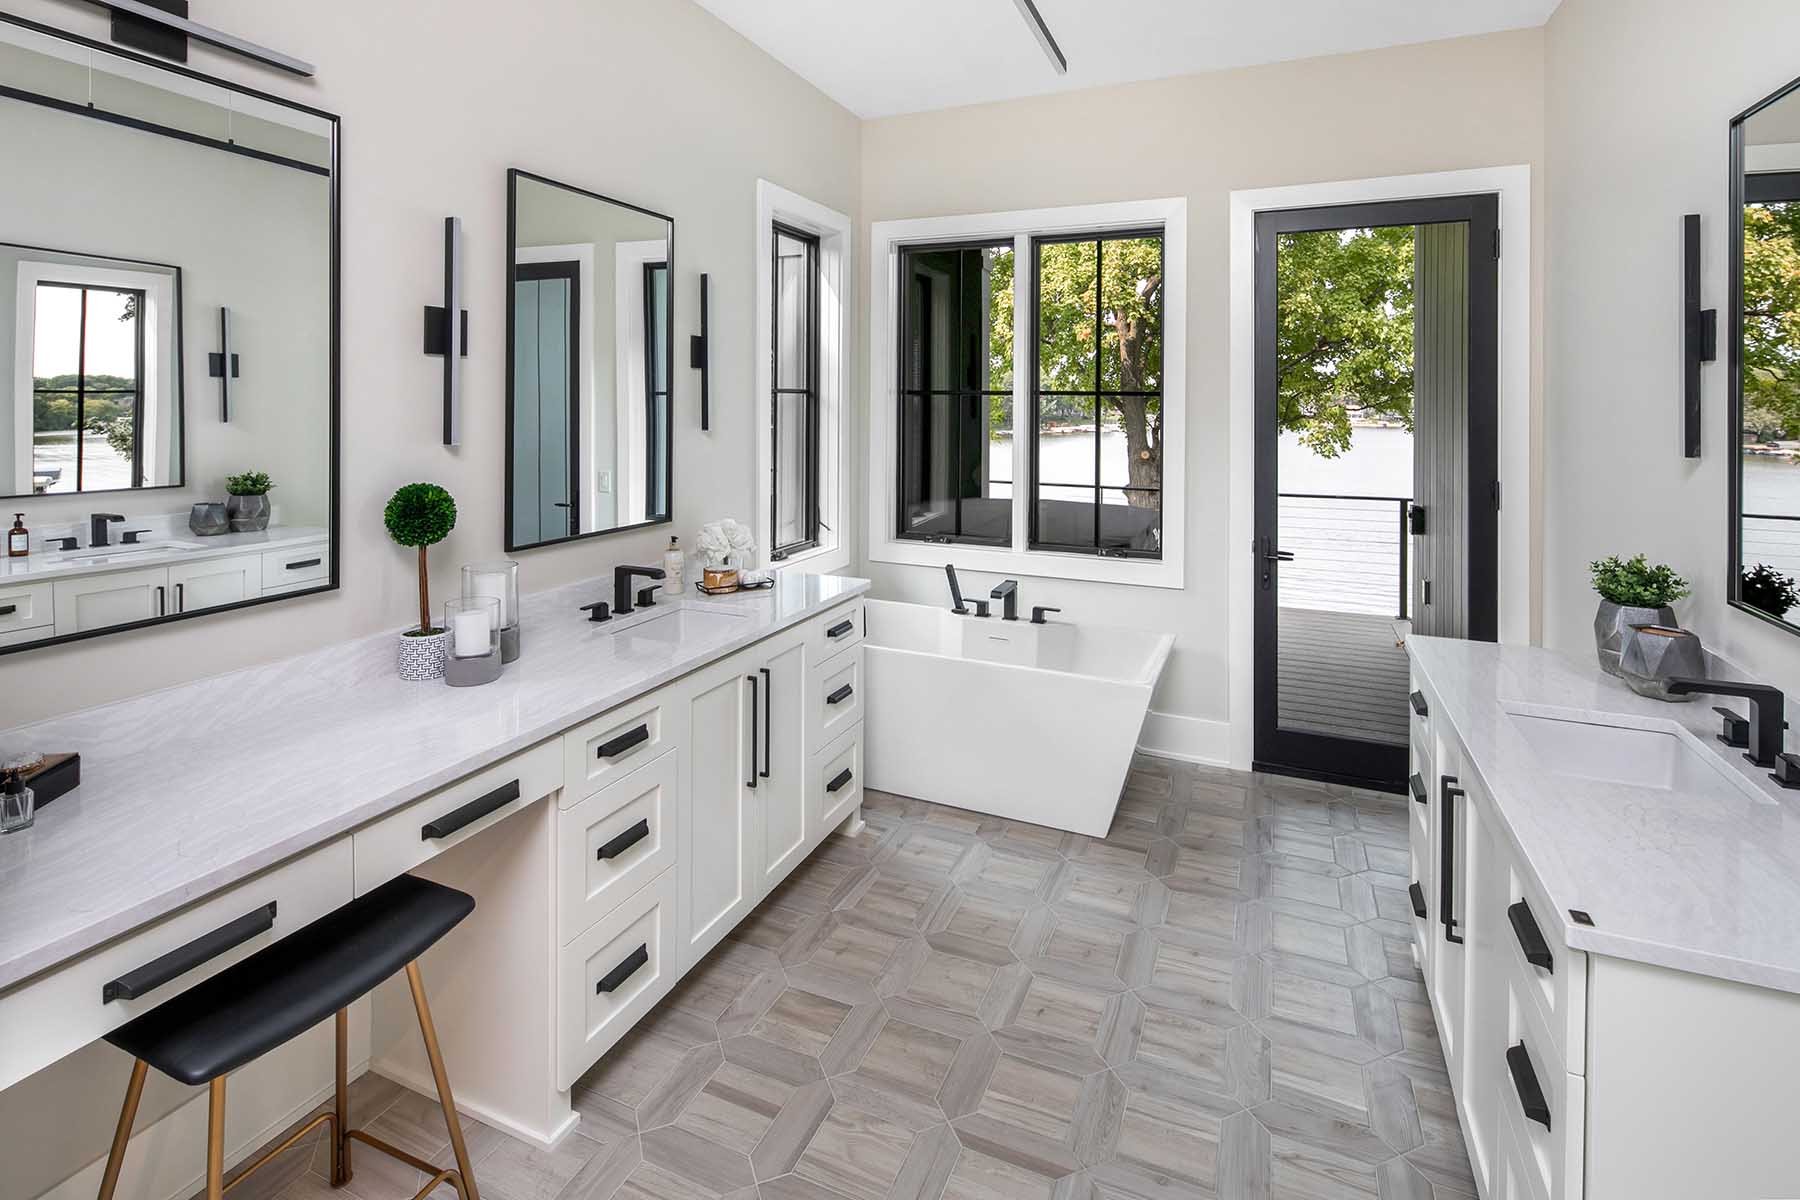 A white bathroom with a large mirror and sink.